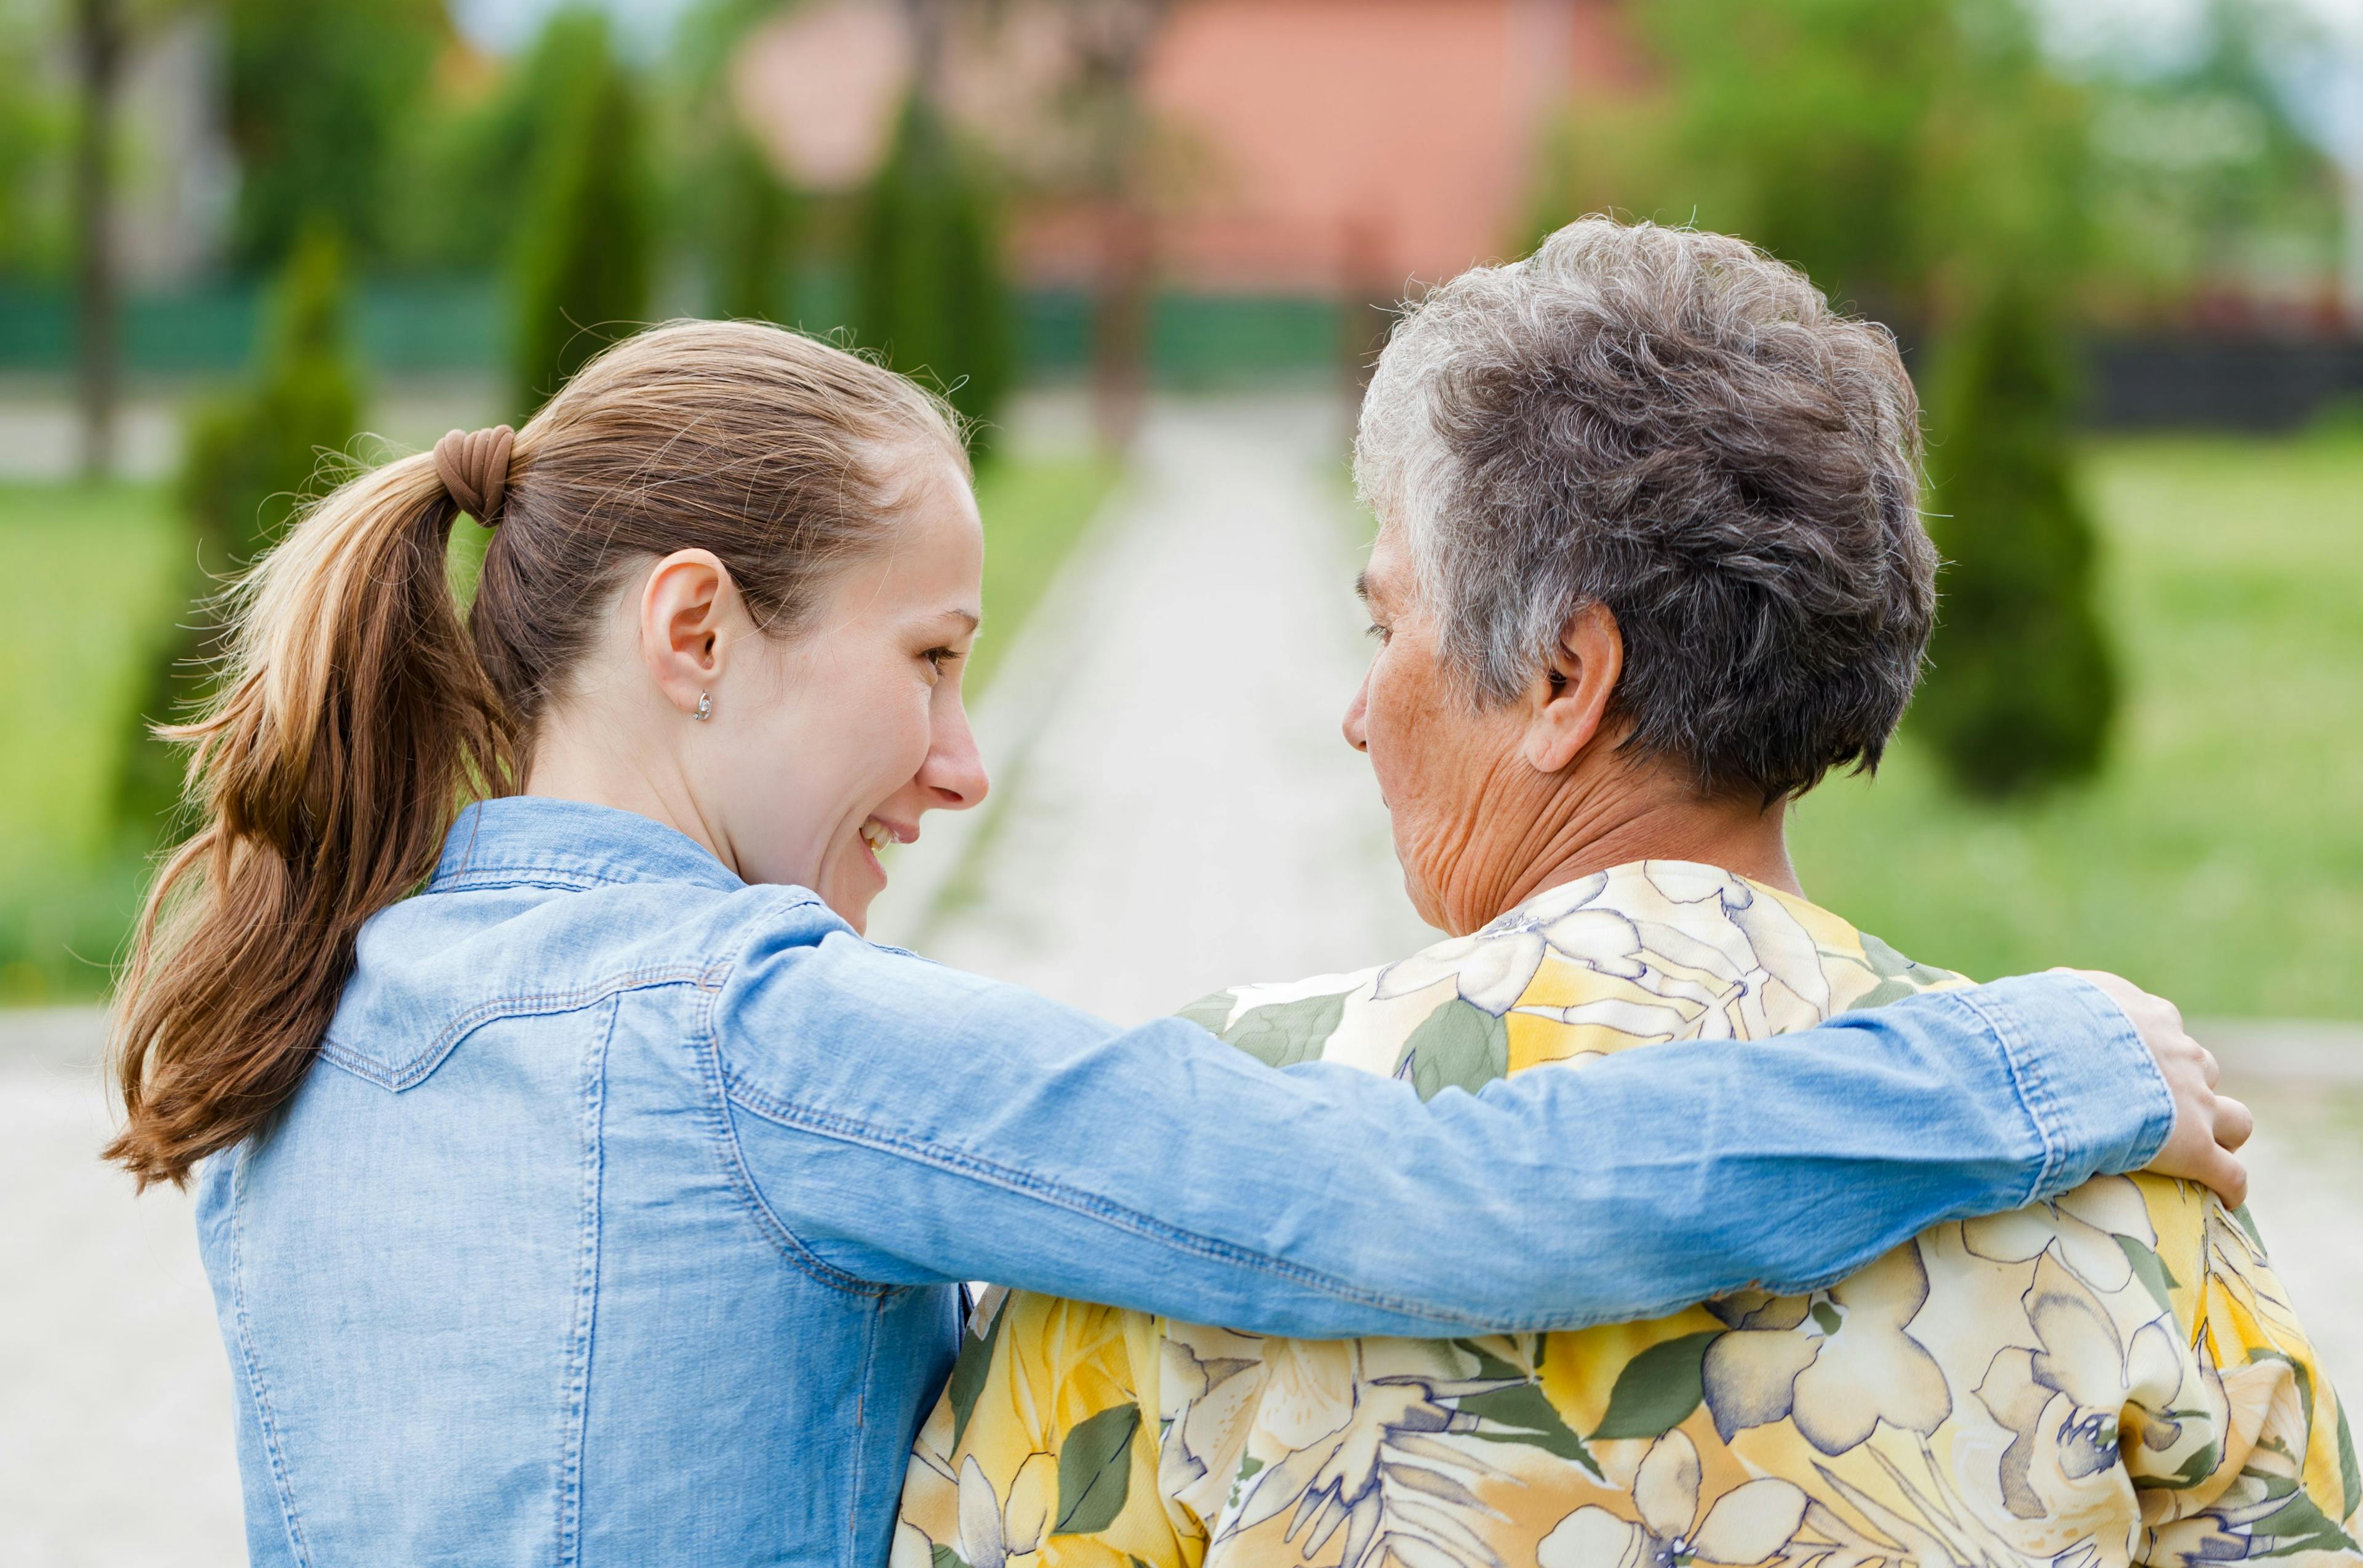 Nearly Half of Cancer Survivors Have a Family Member or Friend as an Informal Caregiver